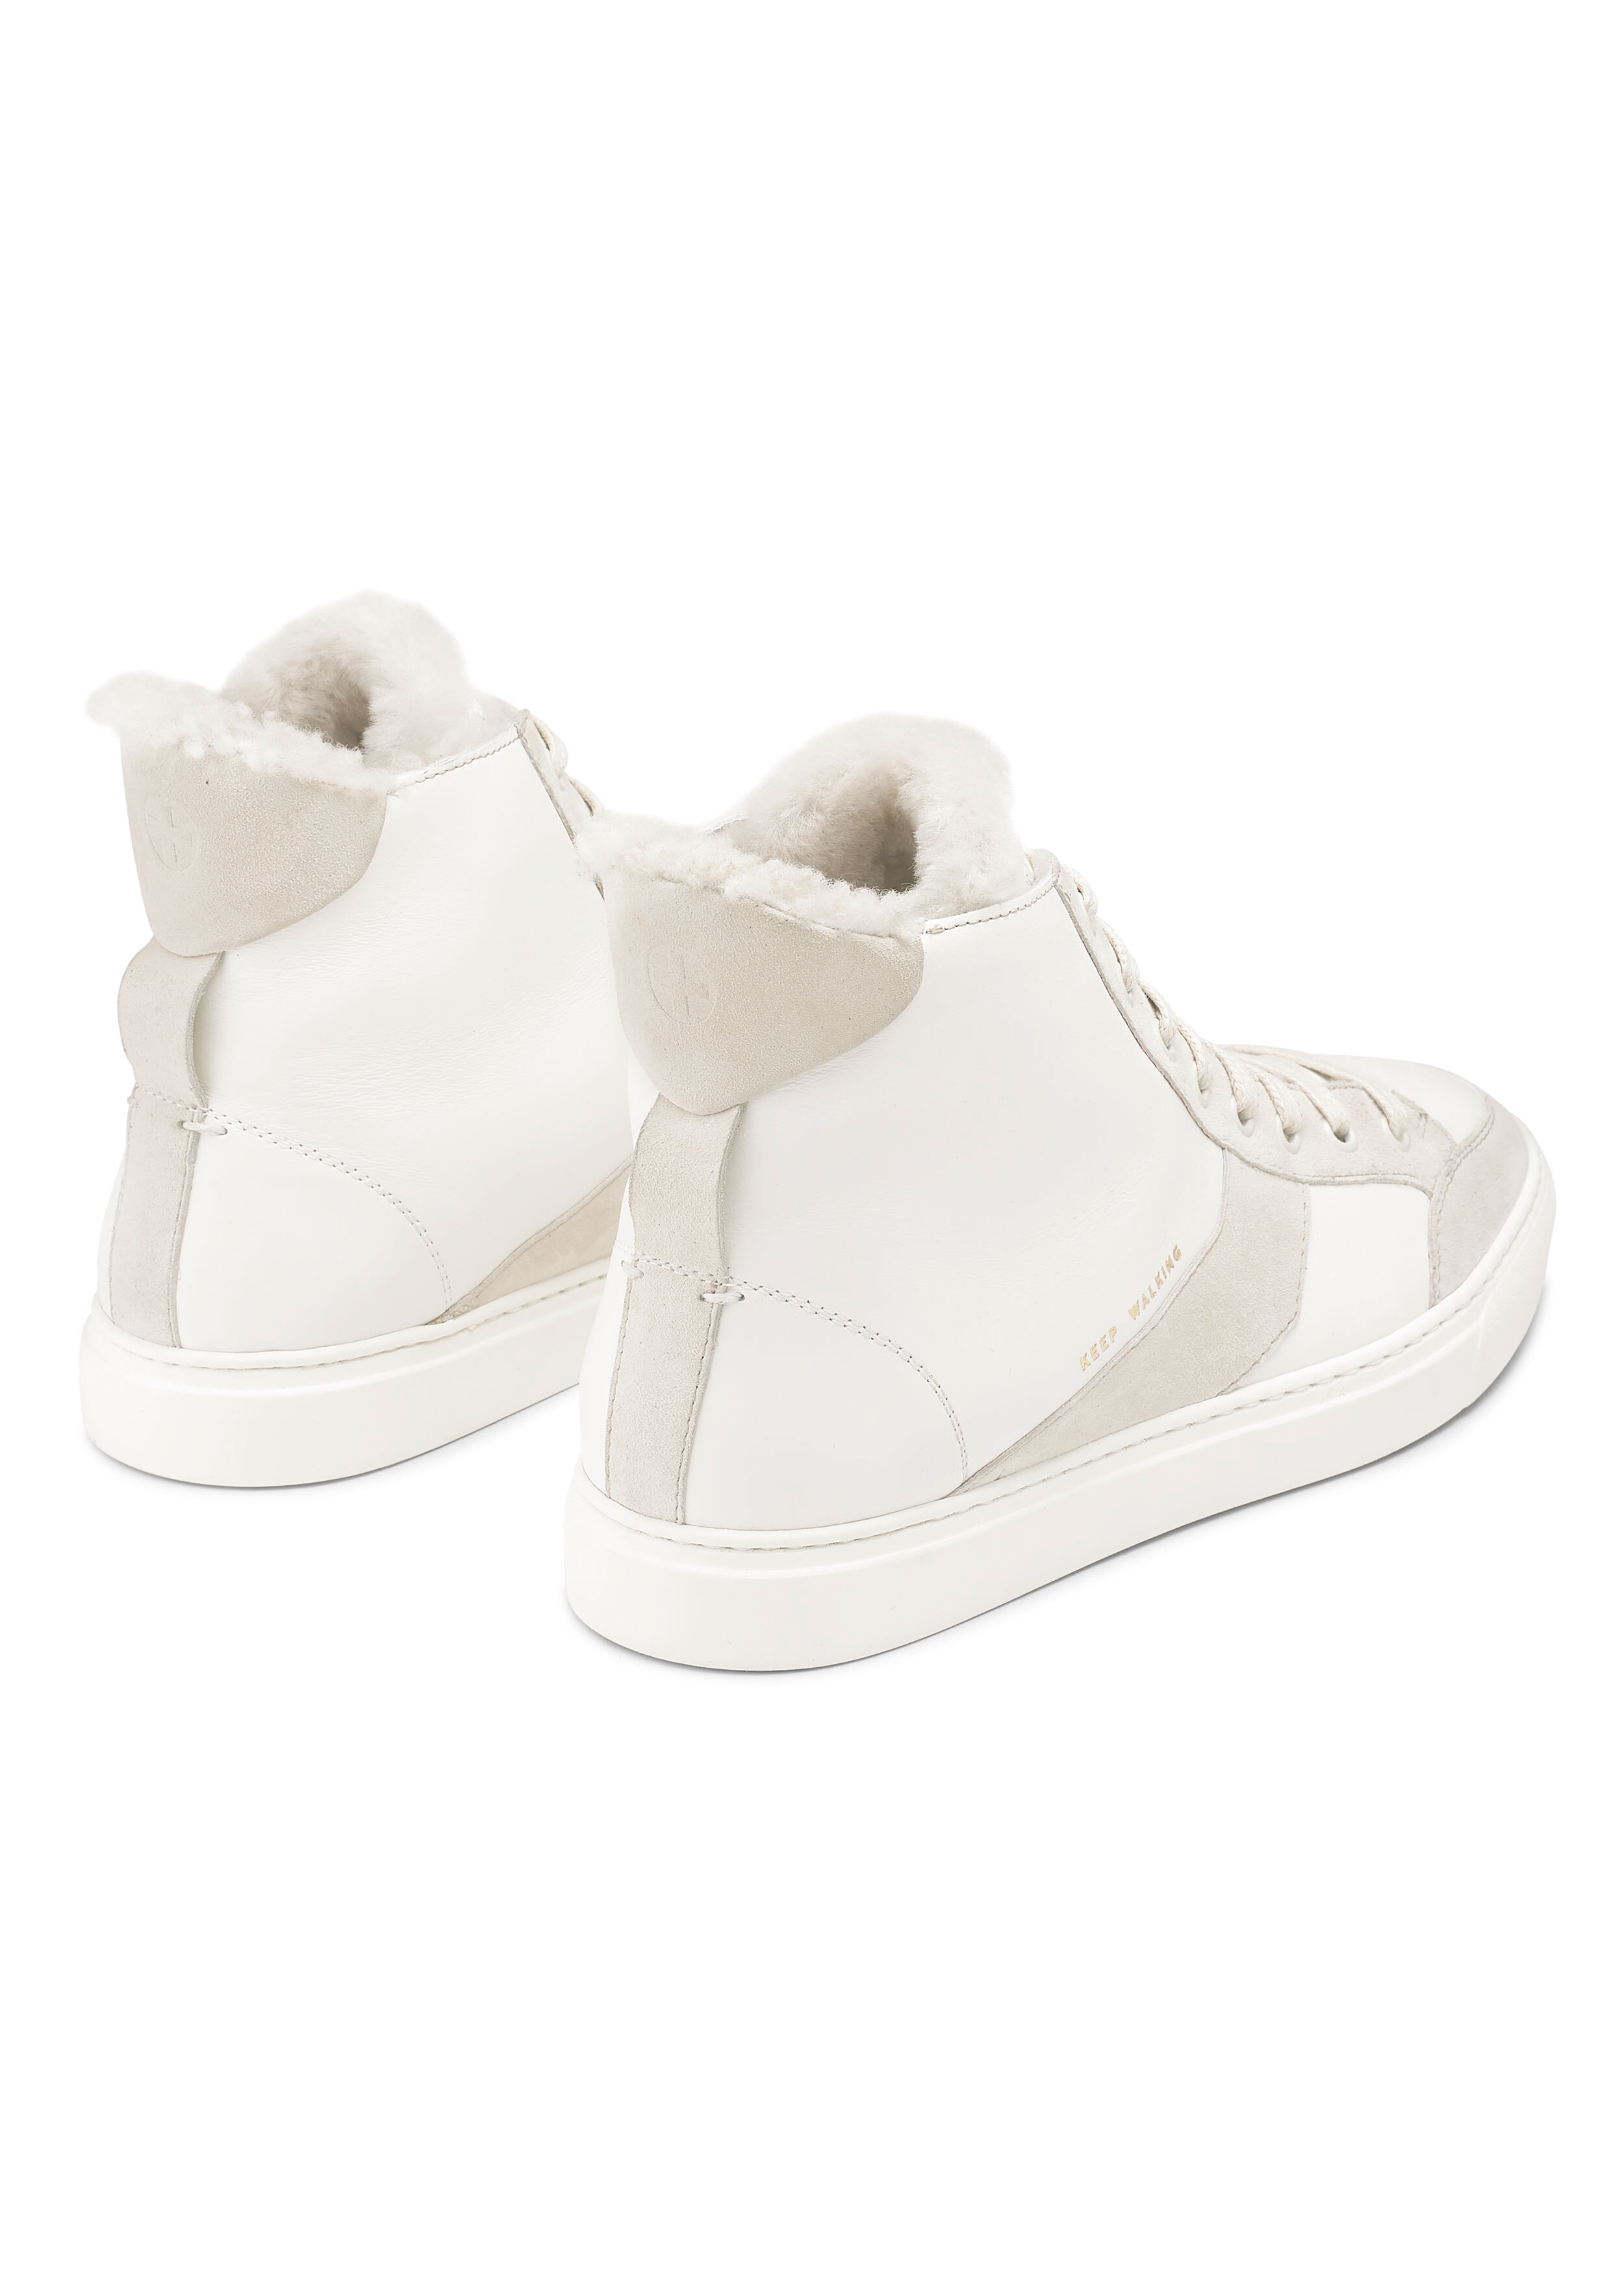 Winter Shearling-Lined Leather High Top Sneaker Pale Neutral